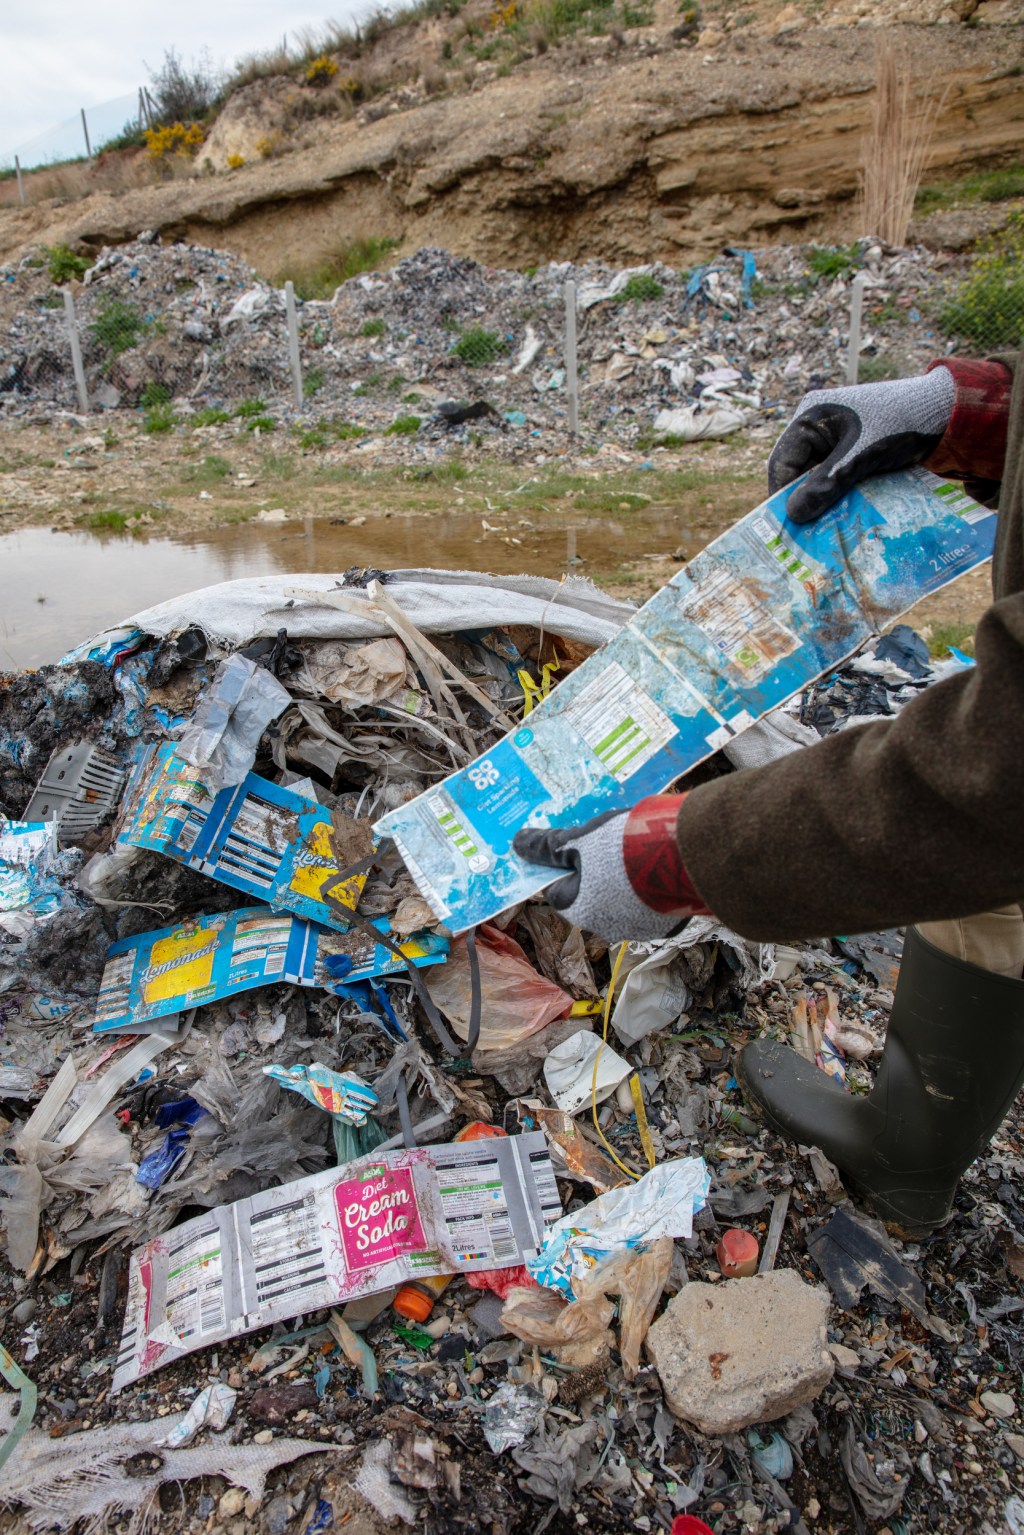 Adana Karahan Investigation into plastic waste that is dumped and burned in Turkey. The team found plastic packaging from UK, German and global food and drinks brands and supermarkets. Image credit: Greenpeace